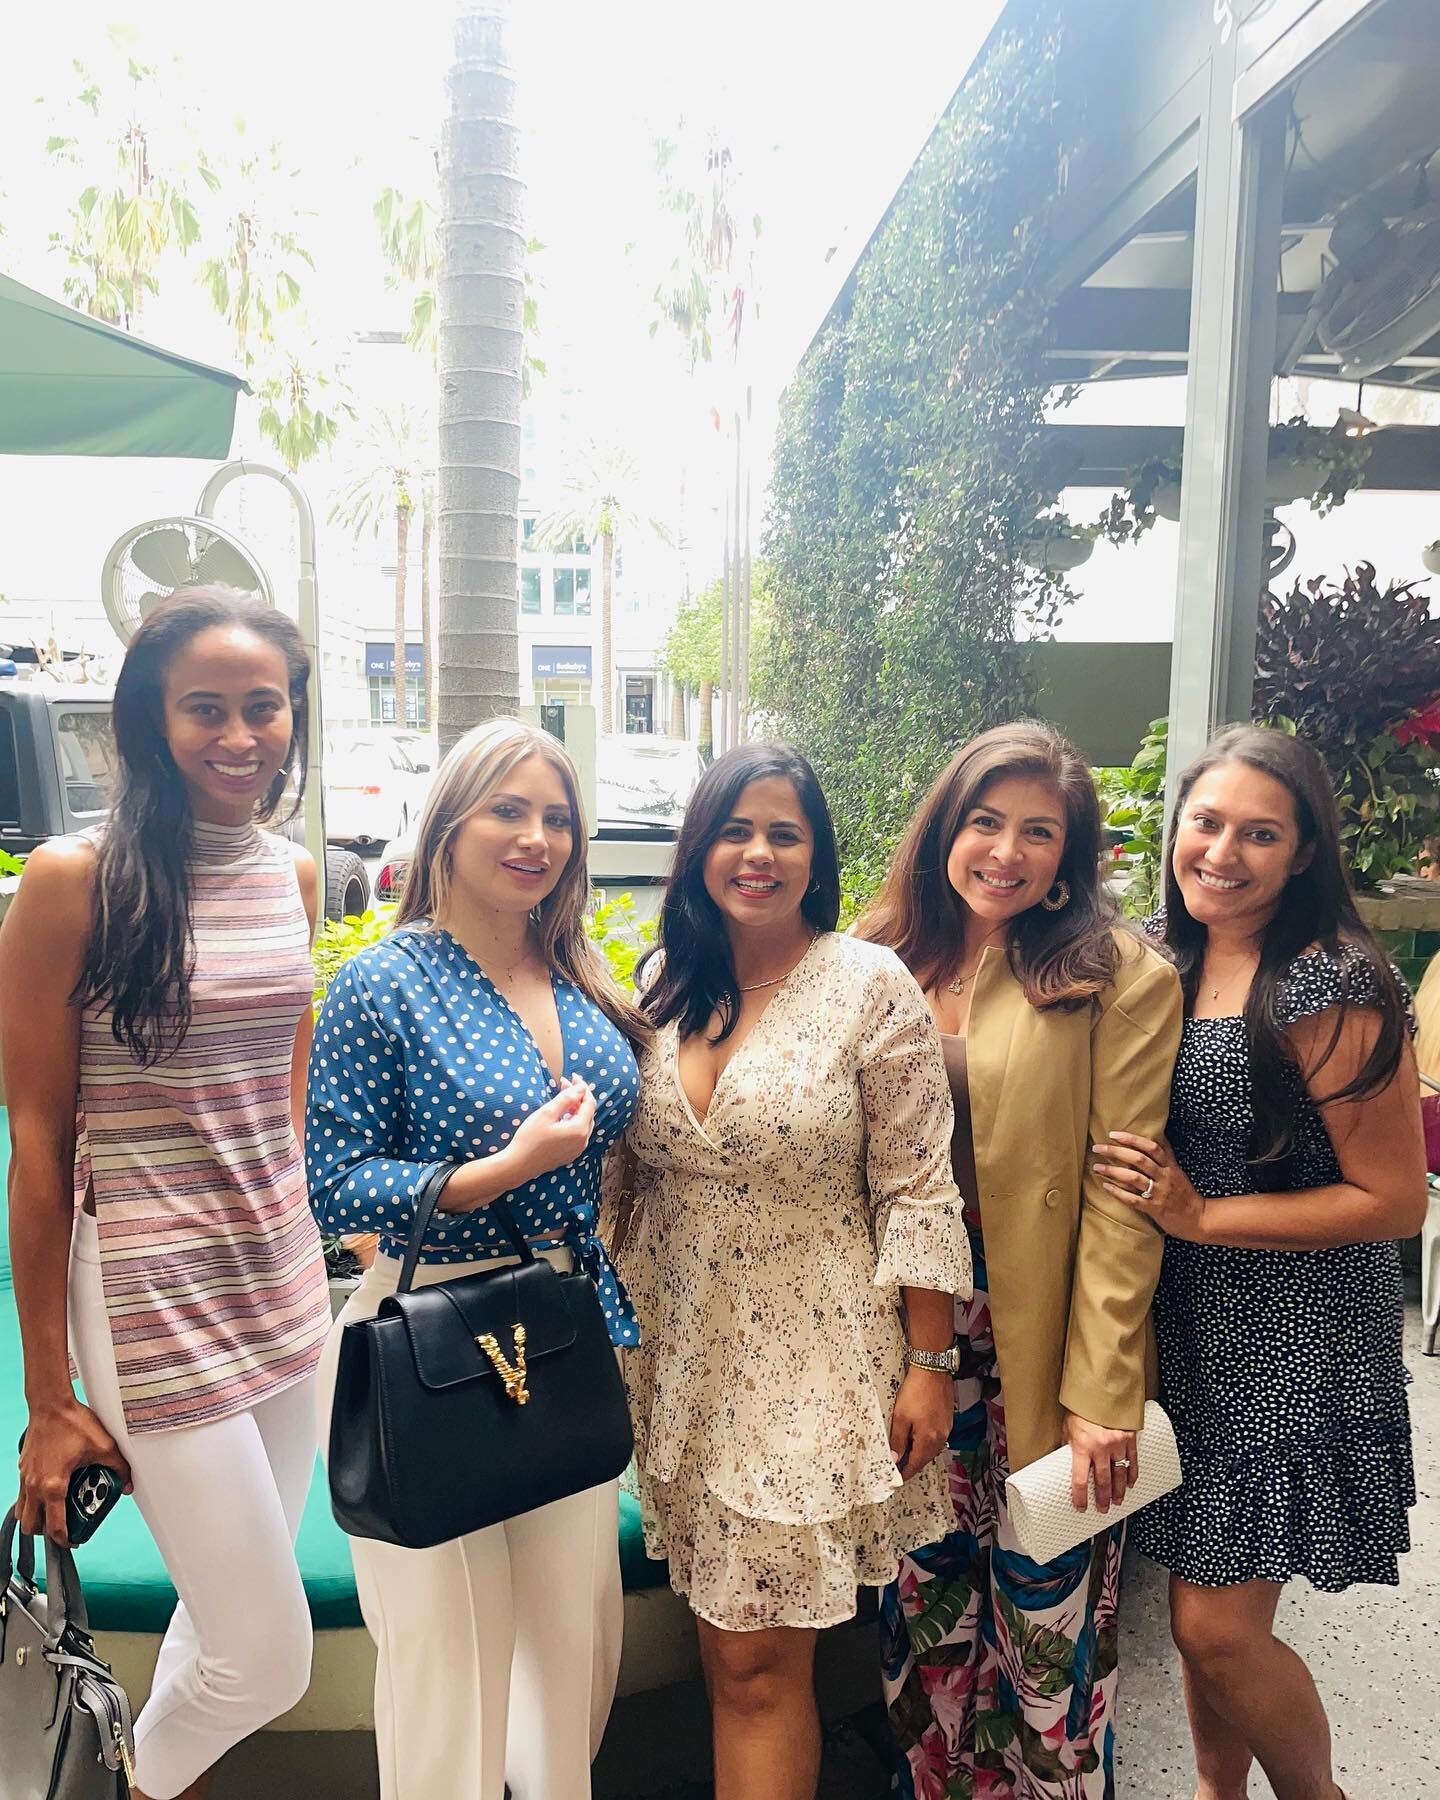 Brunch with these powerful ladies is so much fun! I love each one of them for their uniqueness and beauty inside and out. #realestate #bossbabes #investing #brainstorming #mastermind #weclick #sofun #myladies💕